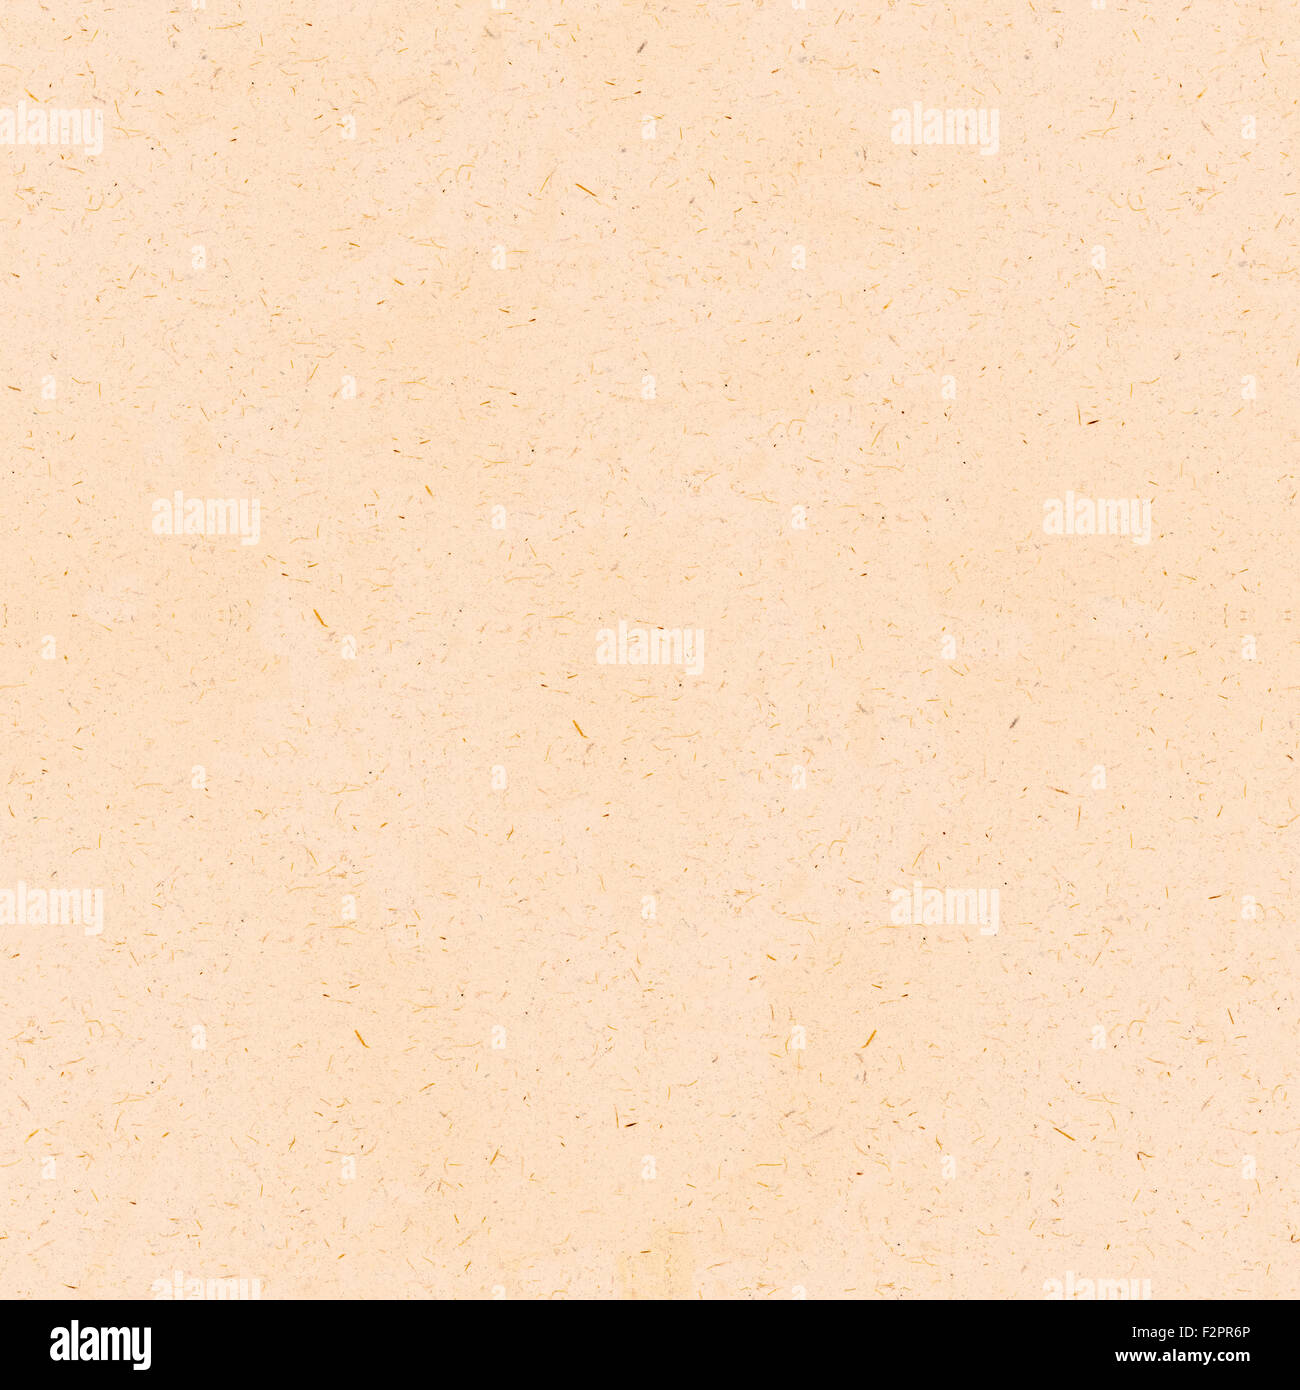 Recycled Paper Seamless Texture Pattern Stock Photo